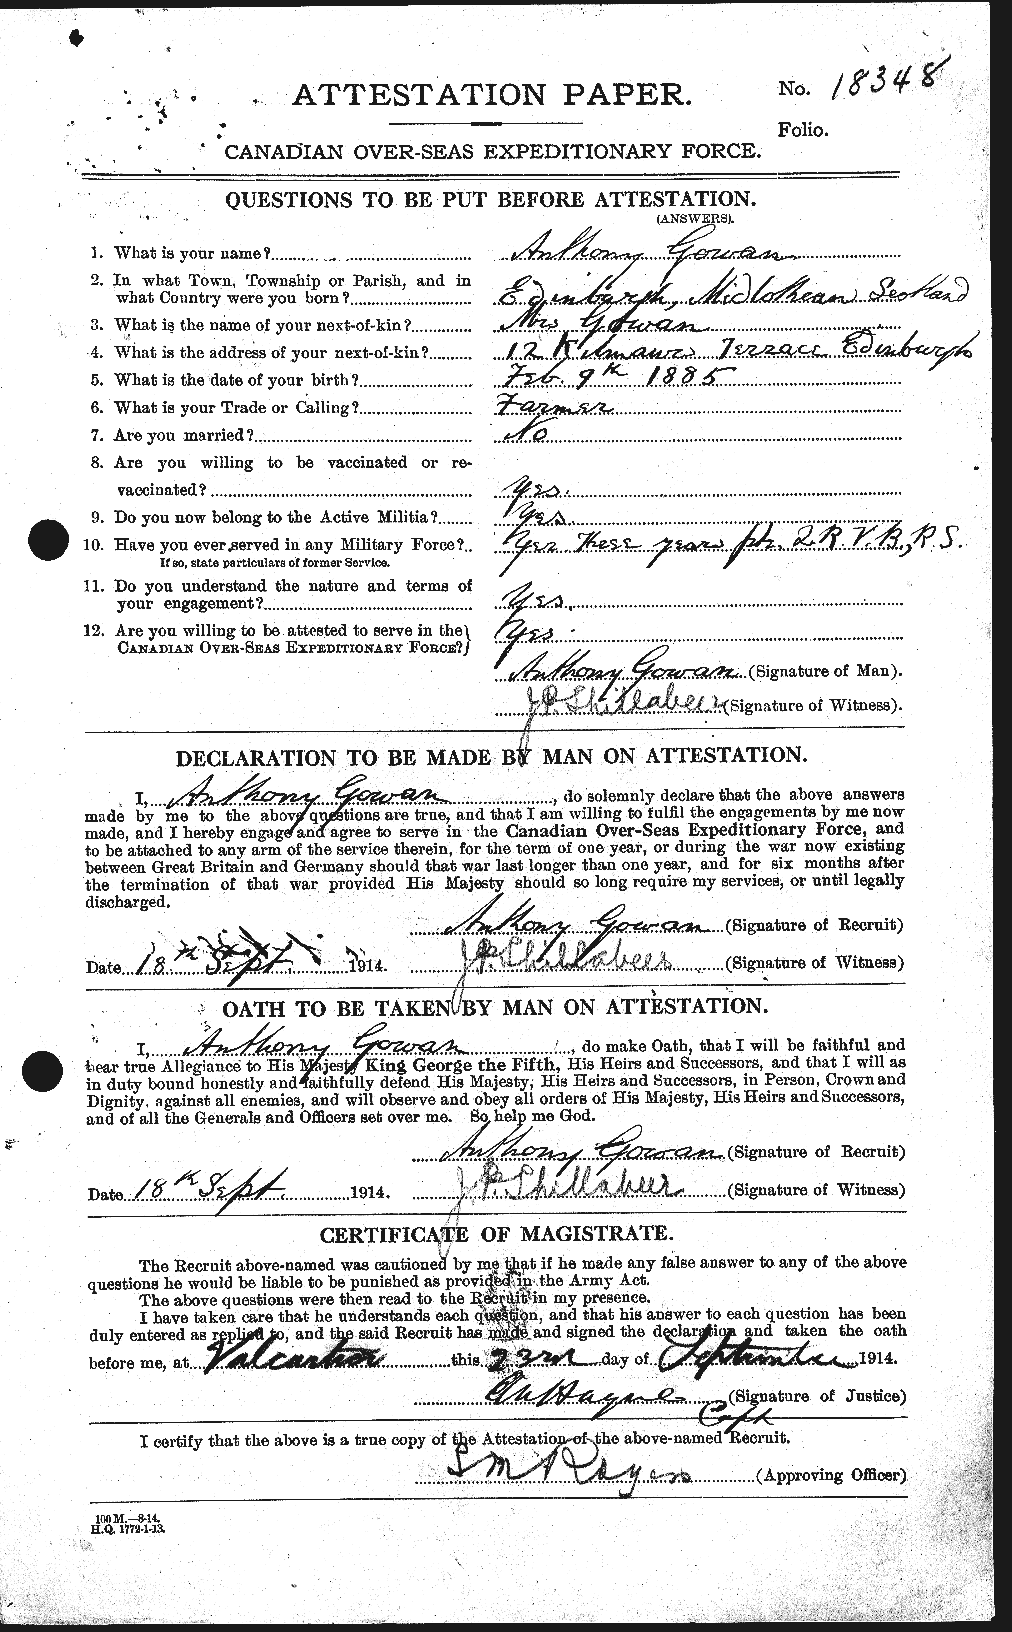 Personnel Records of the First World War - CEF 355860a